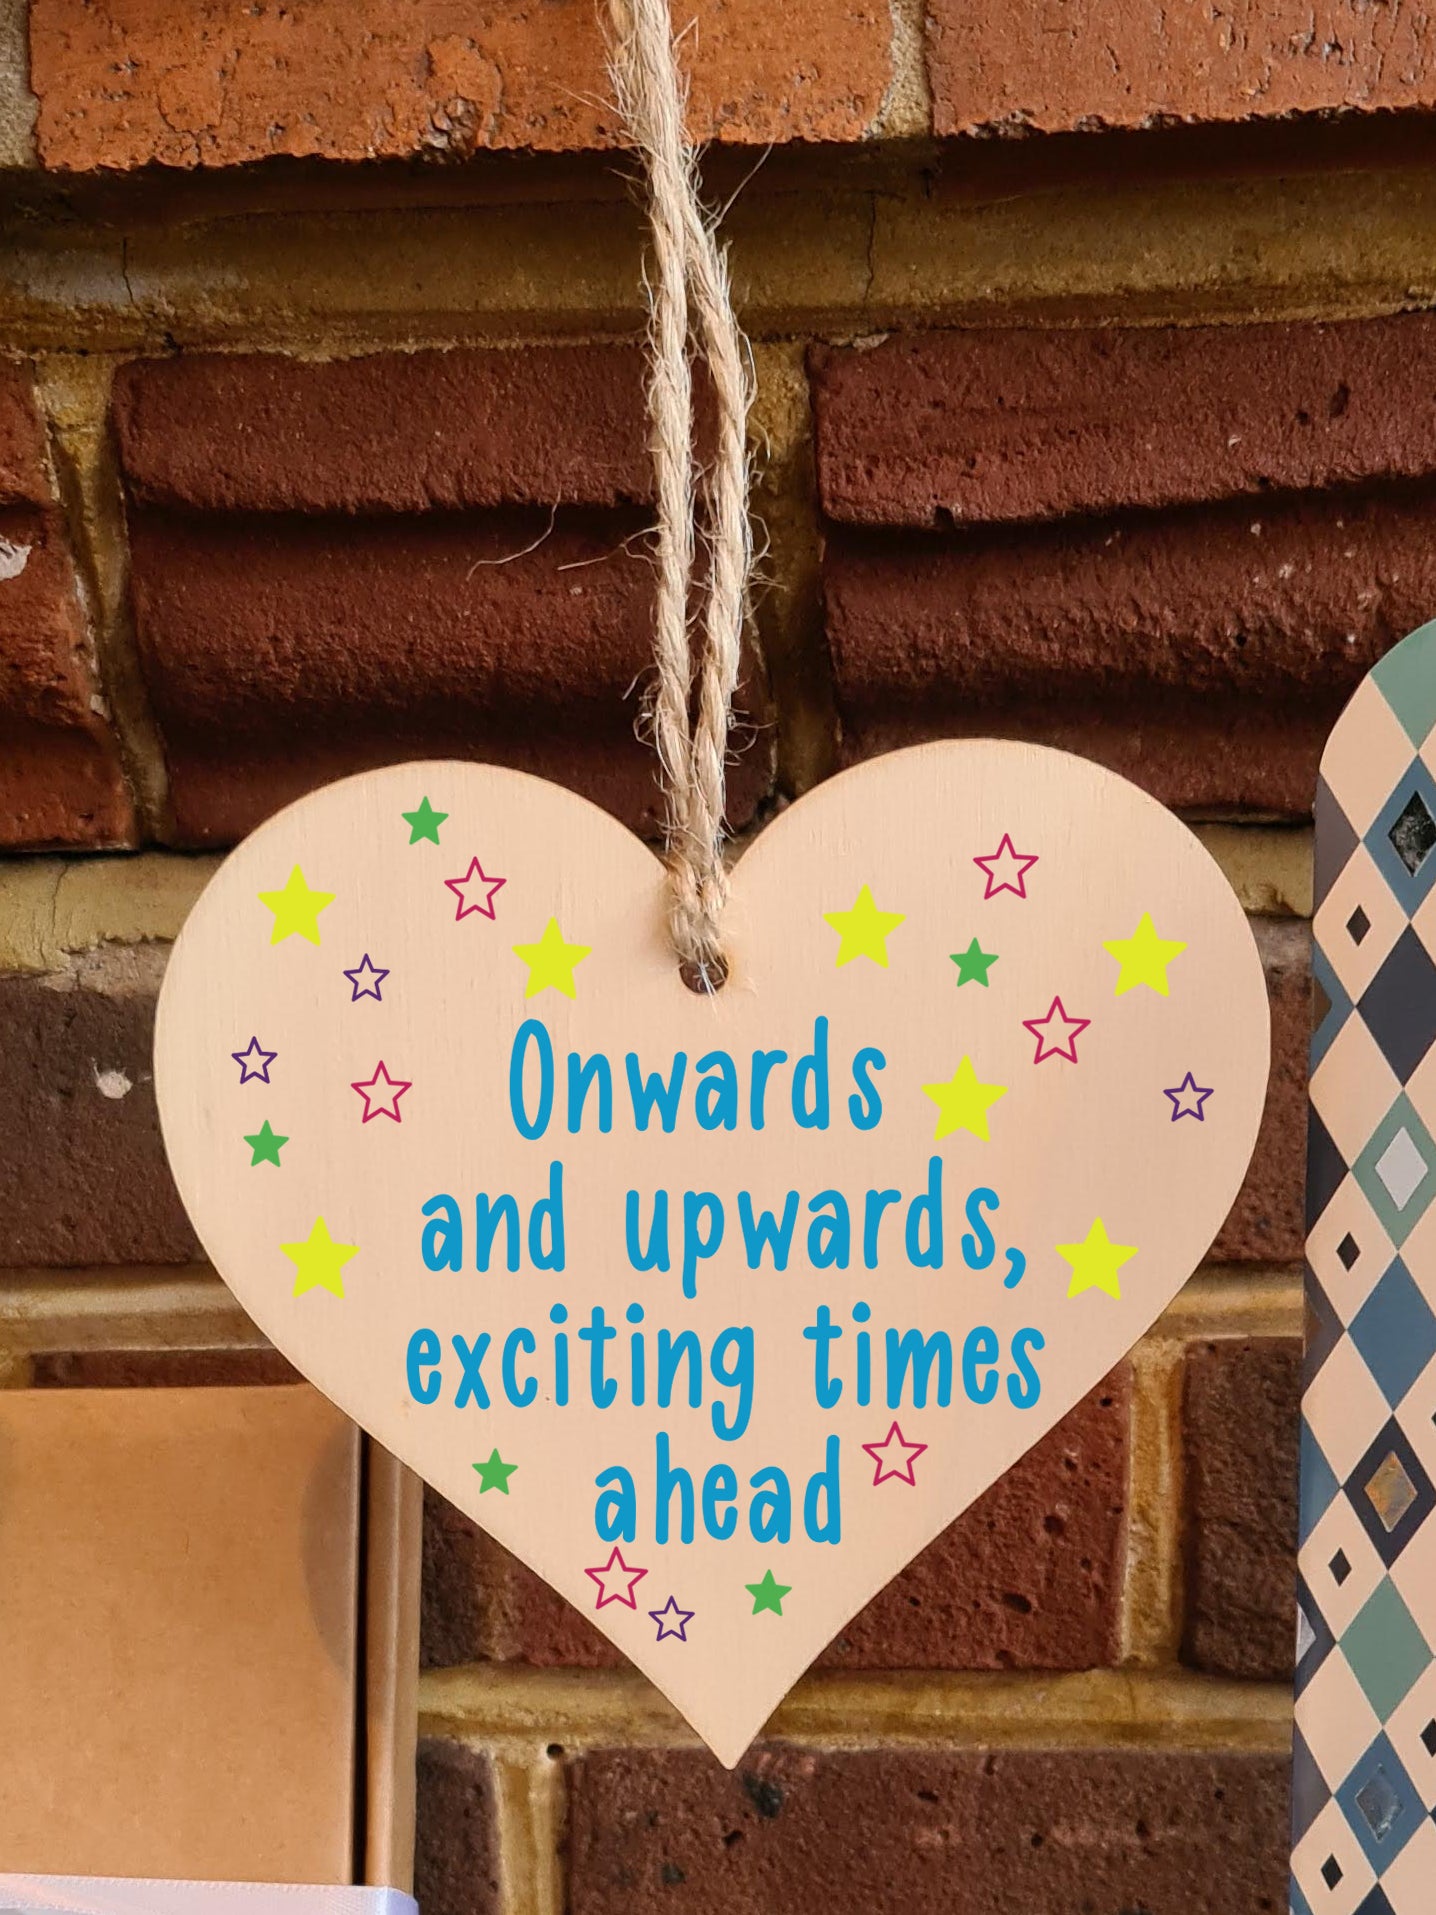 Handmade Wooden Hanging Heart Plaque Gift Exciting Times Ahead Leaving Present Work Colleague Friend Card Alternative